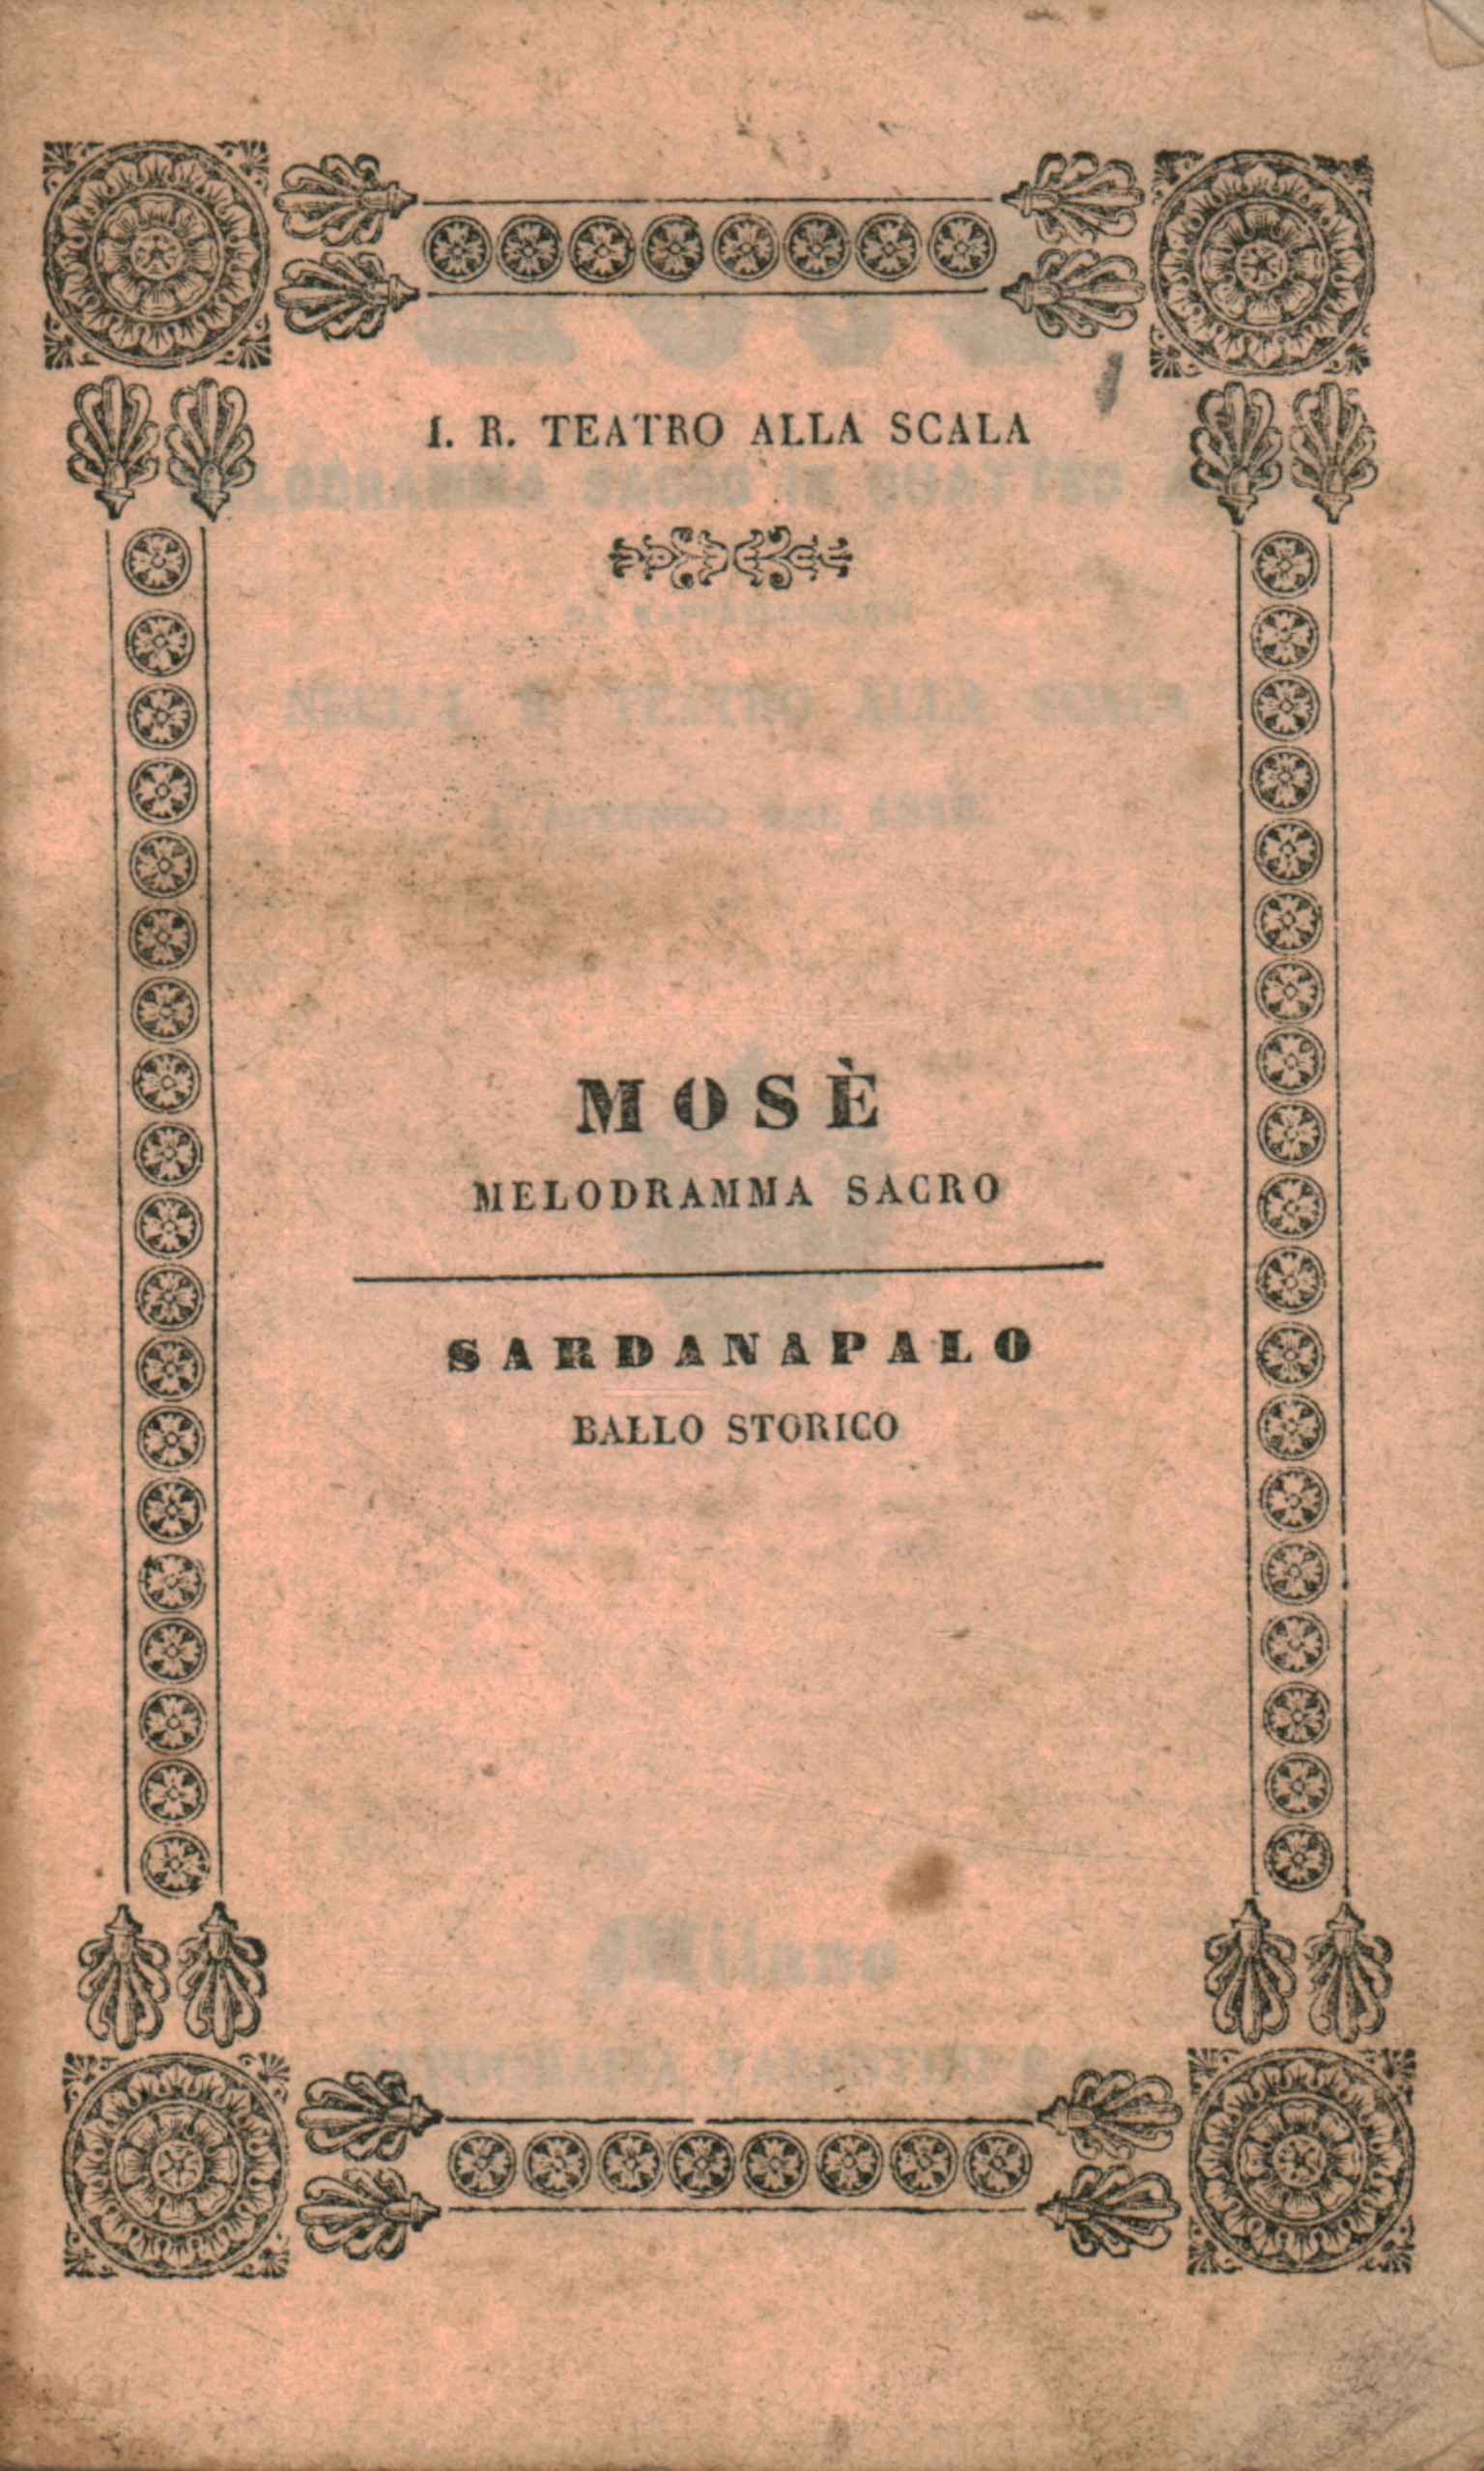 Moses Sacred melodrama in four acts